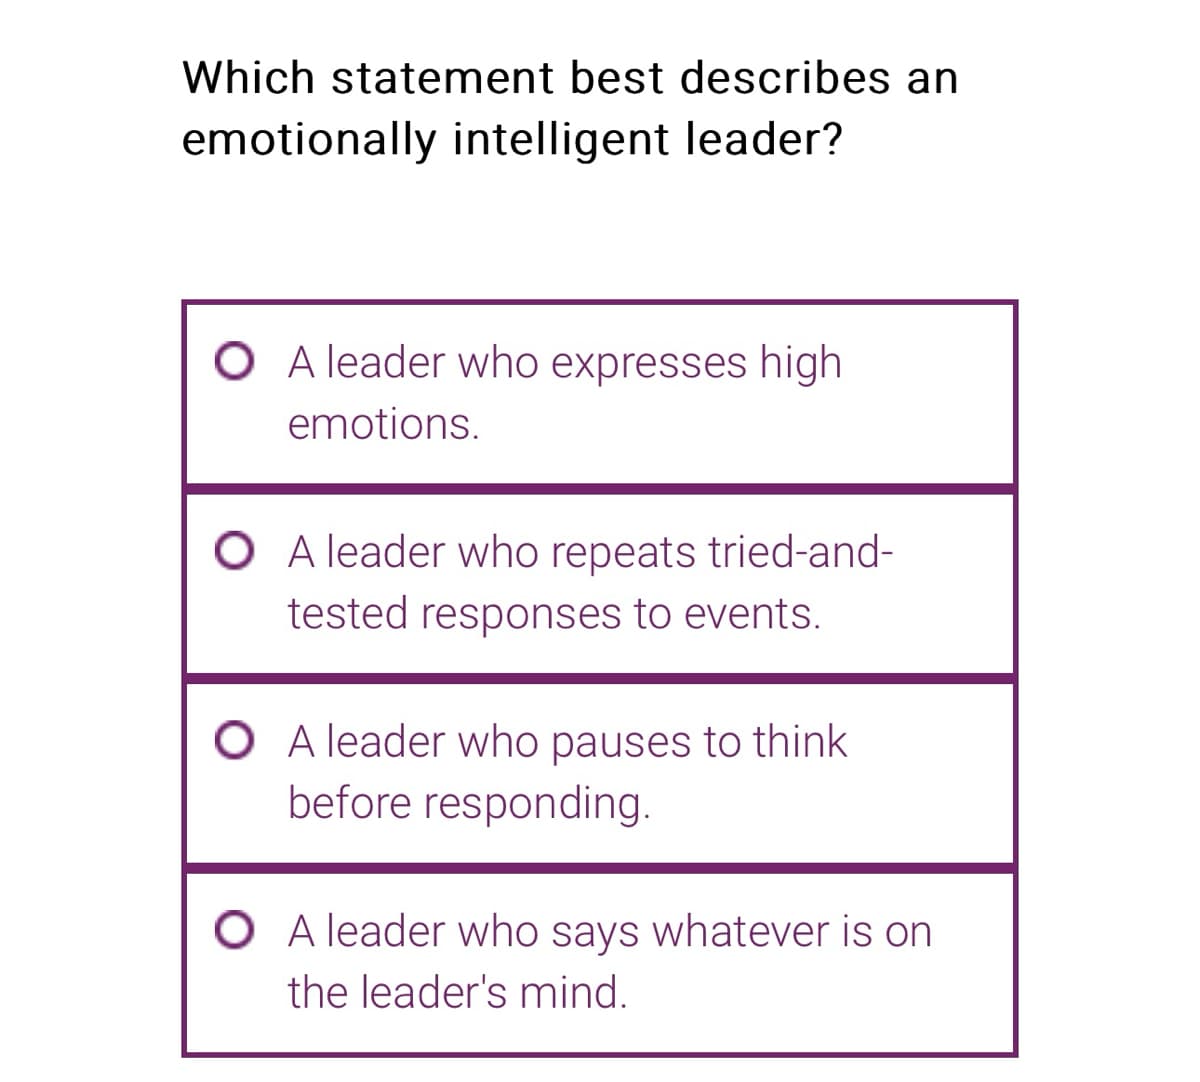 Which statement best describes an
emotionally intelligent leader?
O A leader who expresses high
emotions.
A leader who repeats tried-and-
tested responses to events.
O A leader who pauses to think
before responding.
O A leader who says whatever is on
the leader's mind.